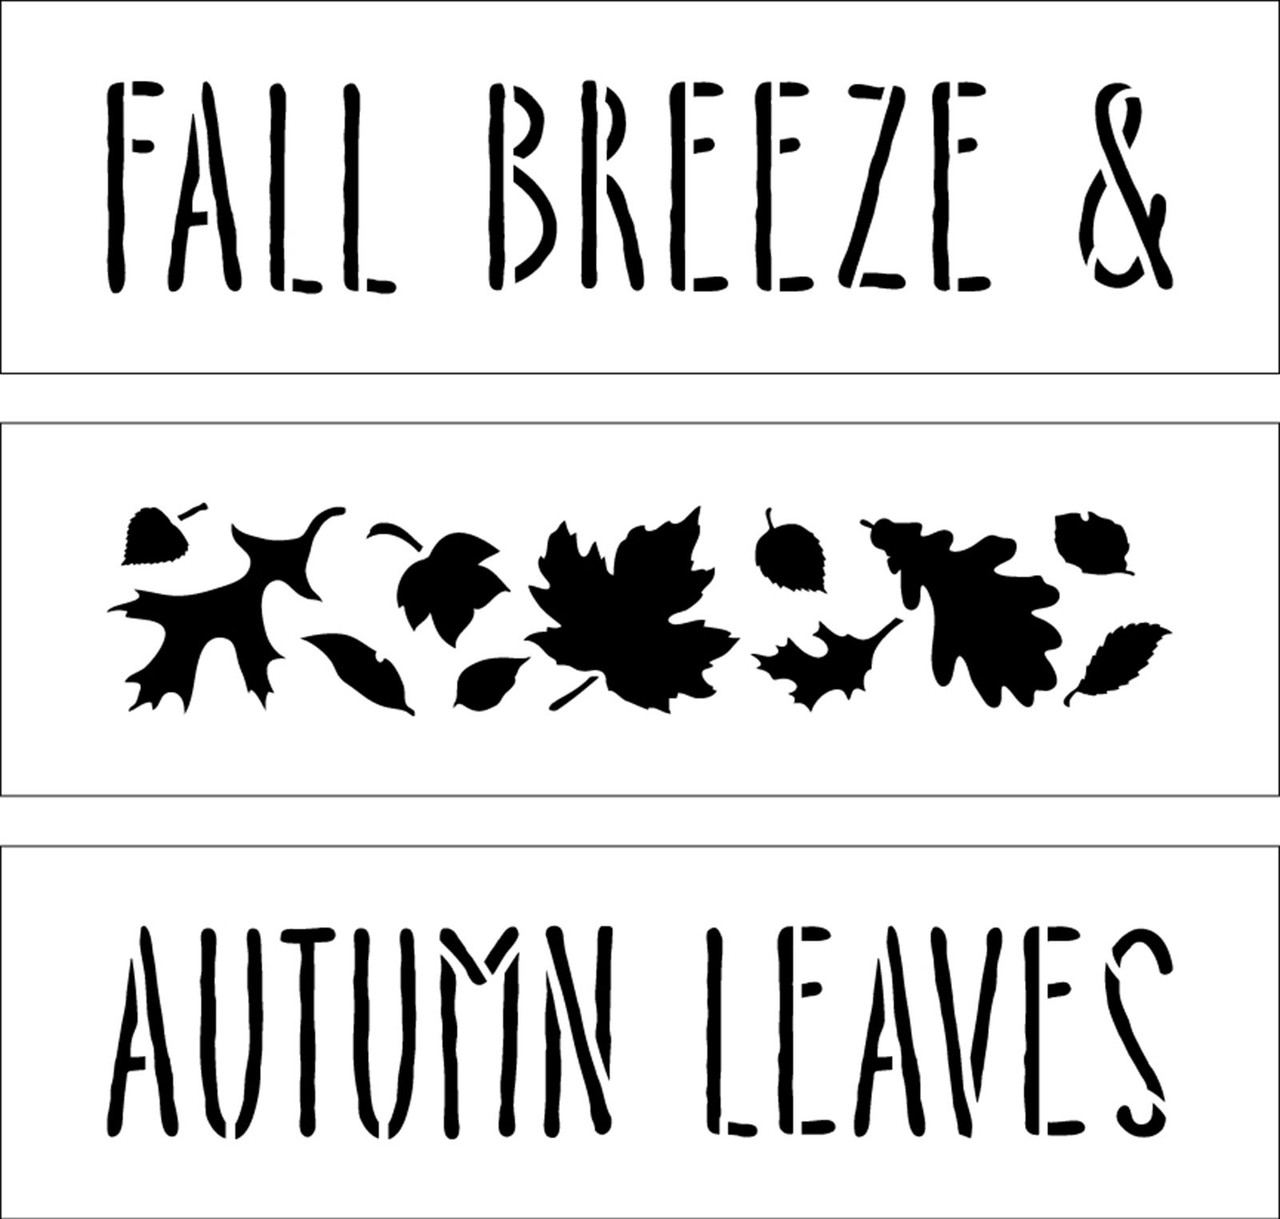 Fall Breeze & Autumn Leaves Stencils for Mini Book Stacks by StudioR12 - Select Size - USA Made - DIY Skinny Stacked Wood Blocks for Tiered Tray - STCL7096